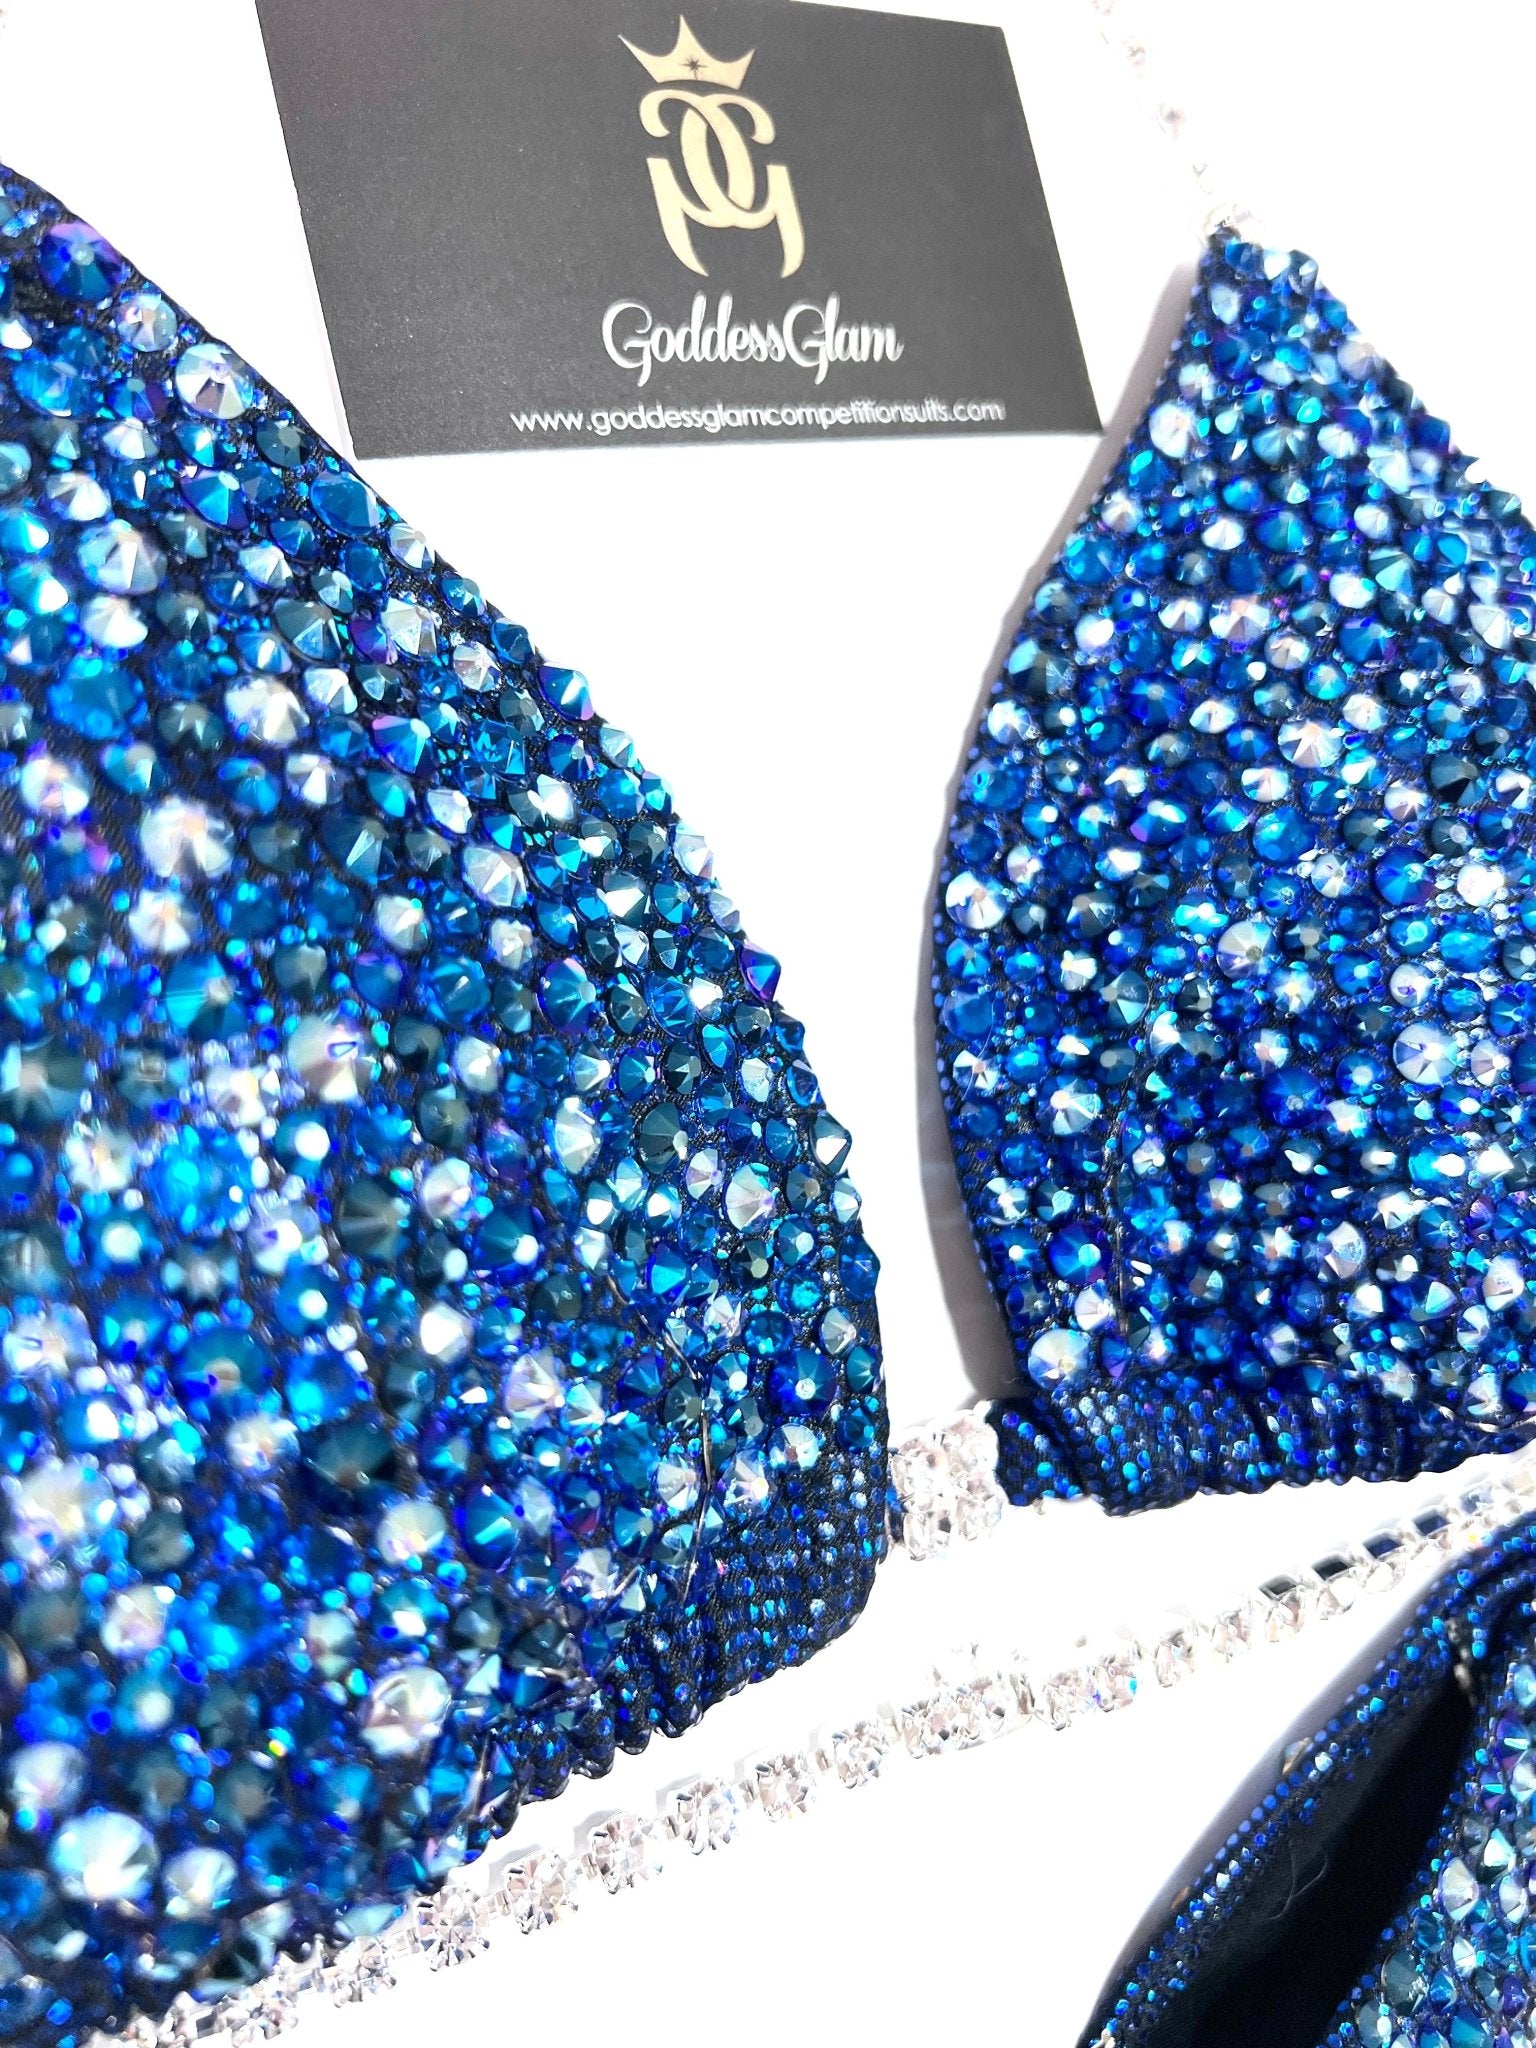 SDGB0256 - Goddess Glam Custom Competition Suits